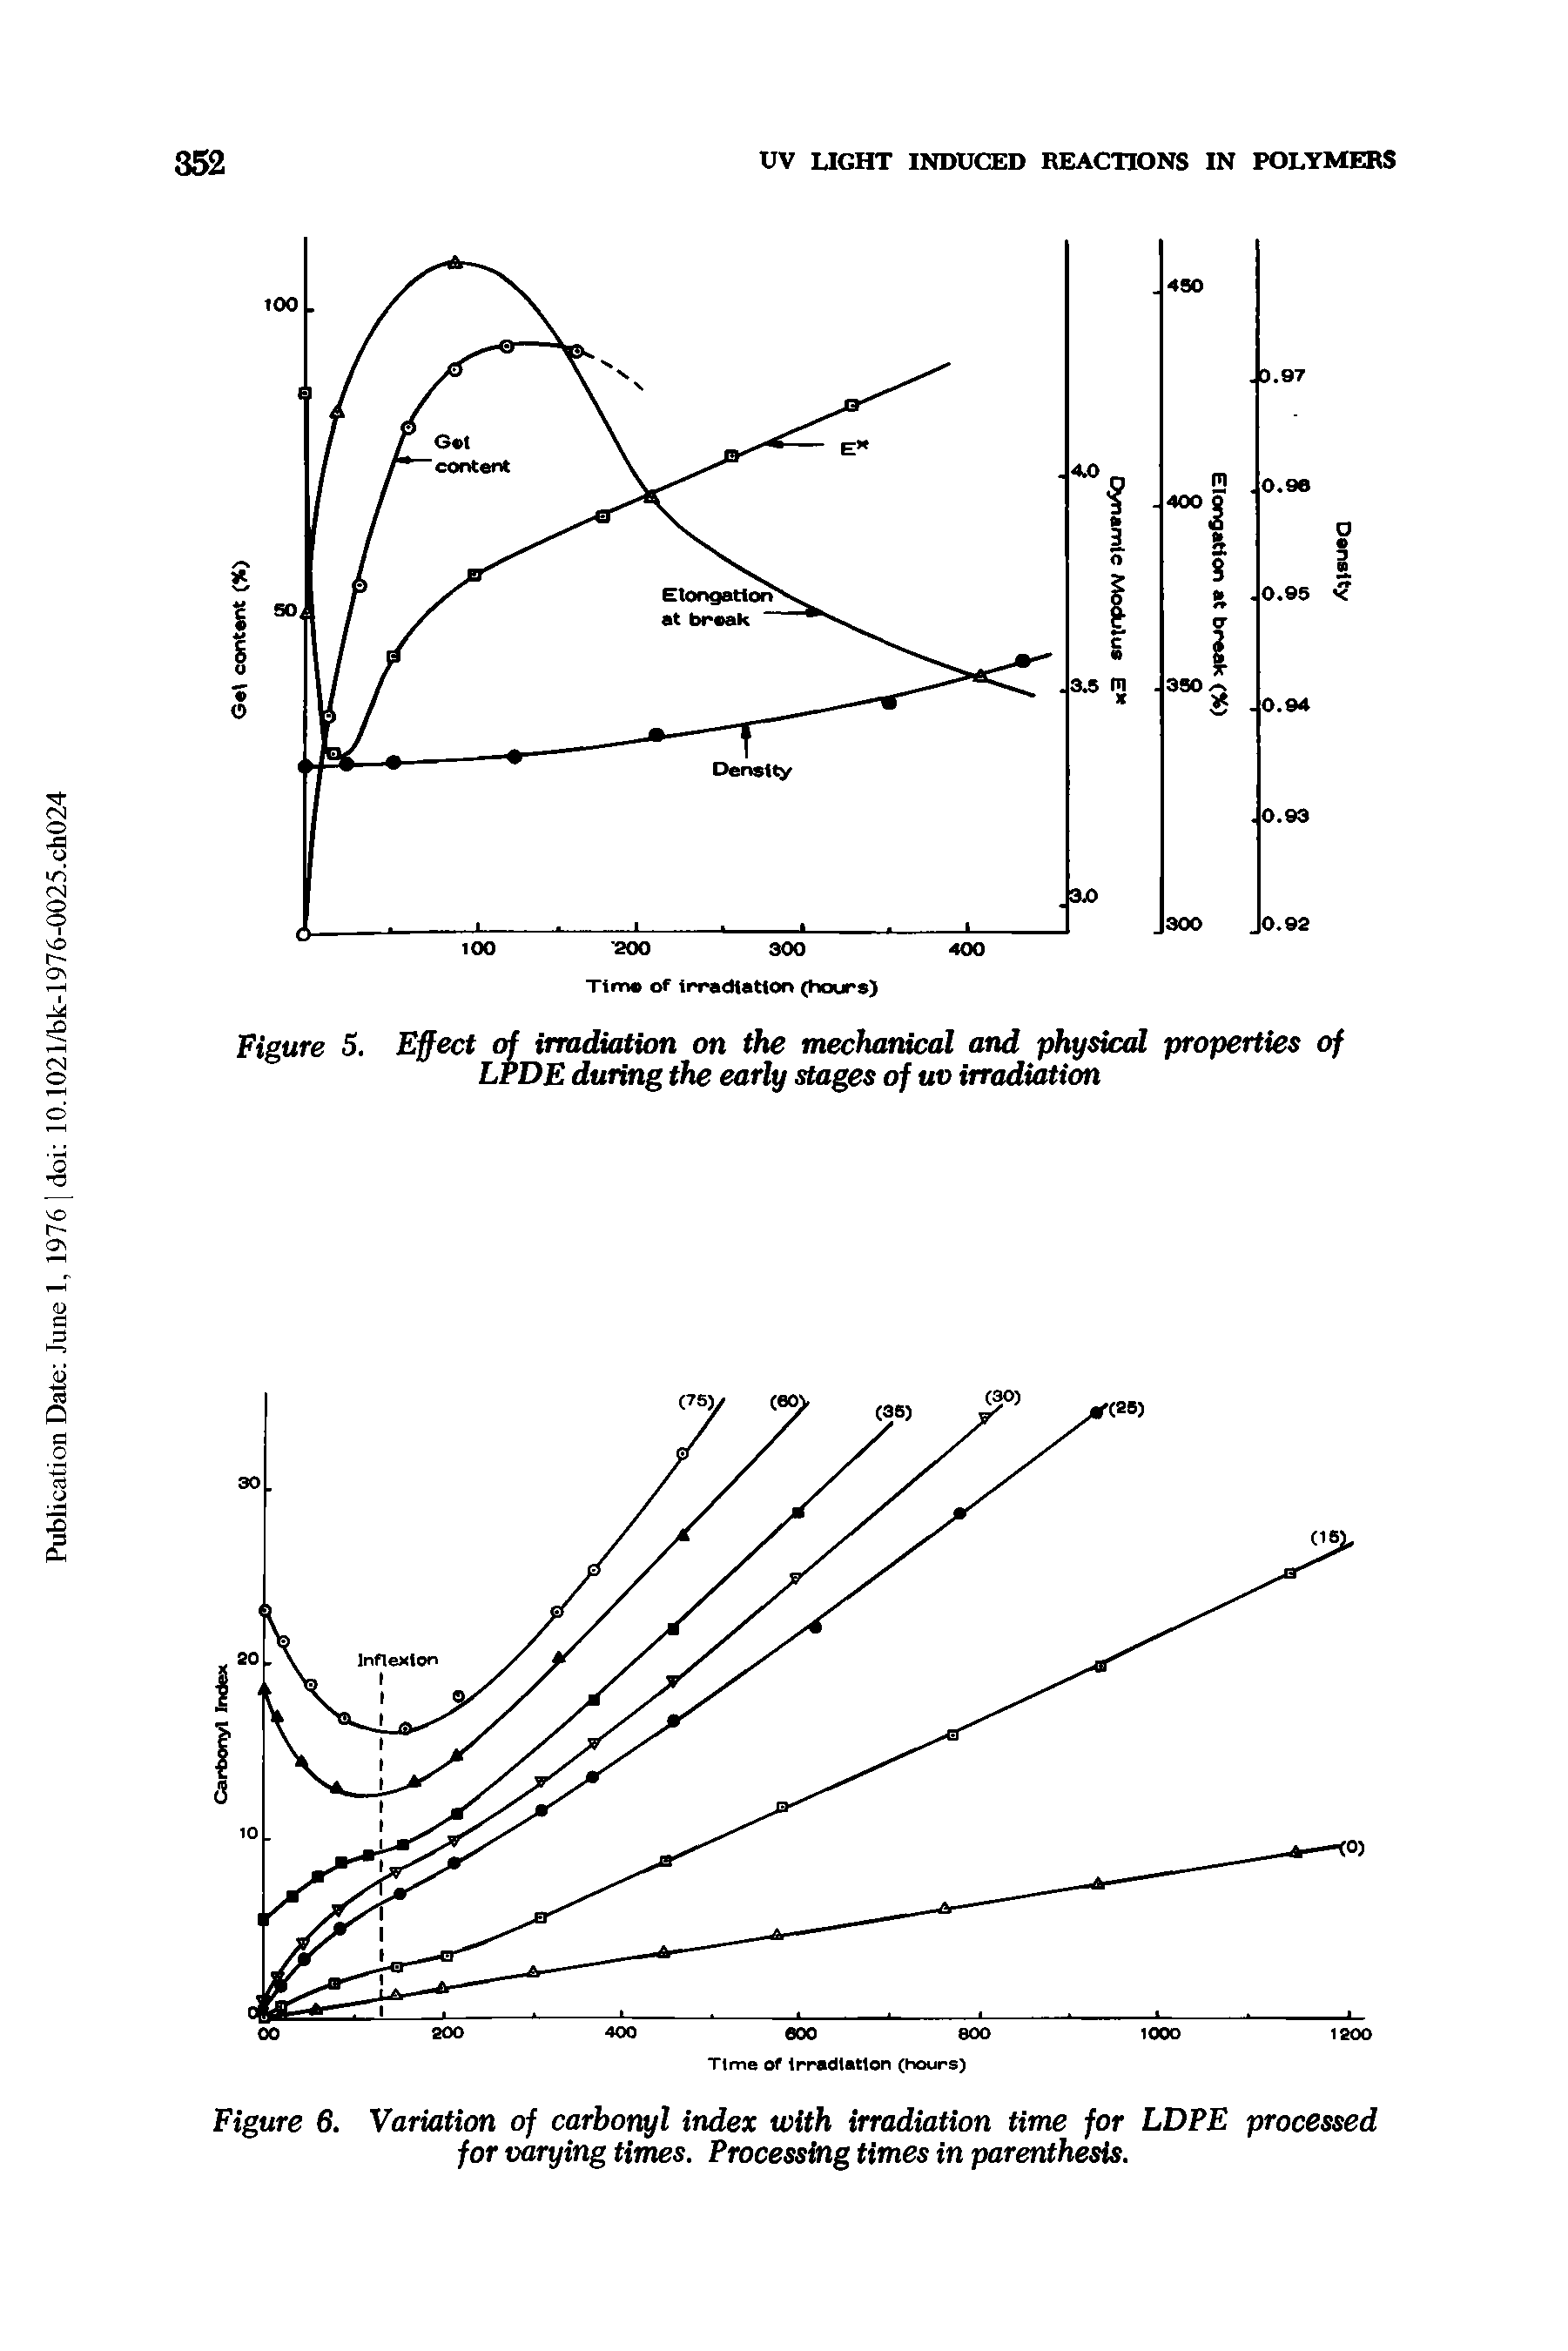 Figure 6. Variation of carbonyl index with irradiation time for LDPE processed for varying times. Processing times in parenthesis.